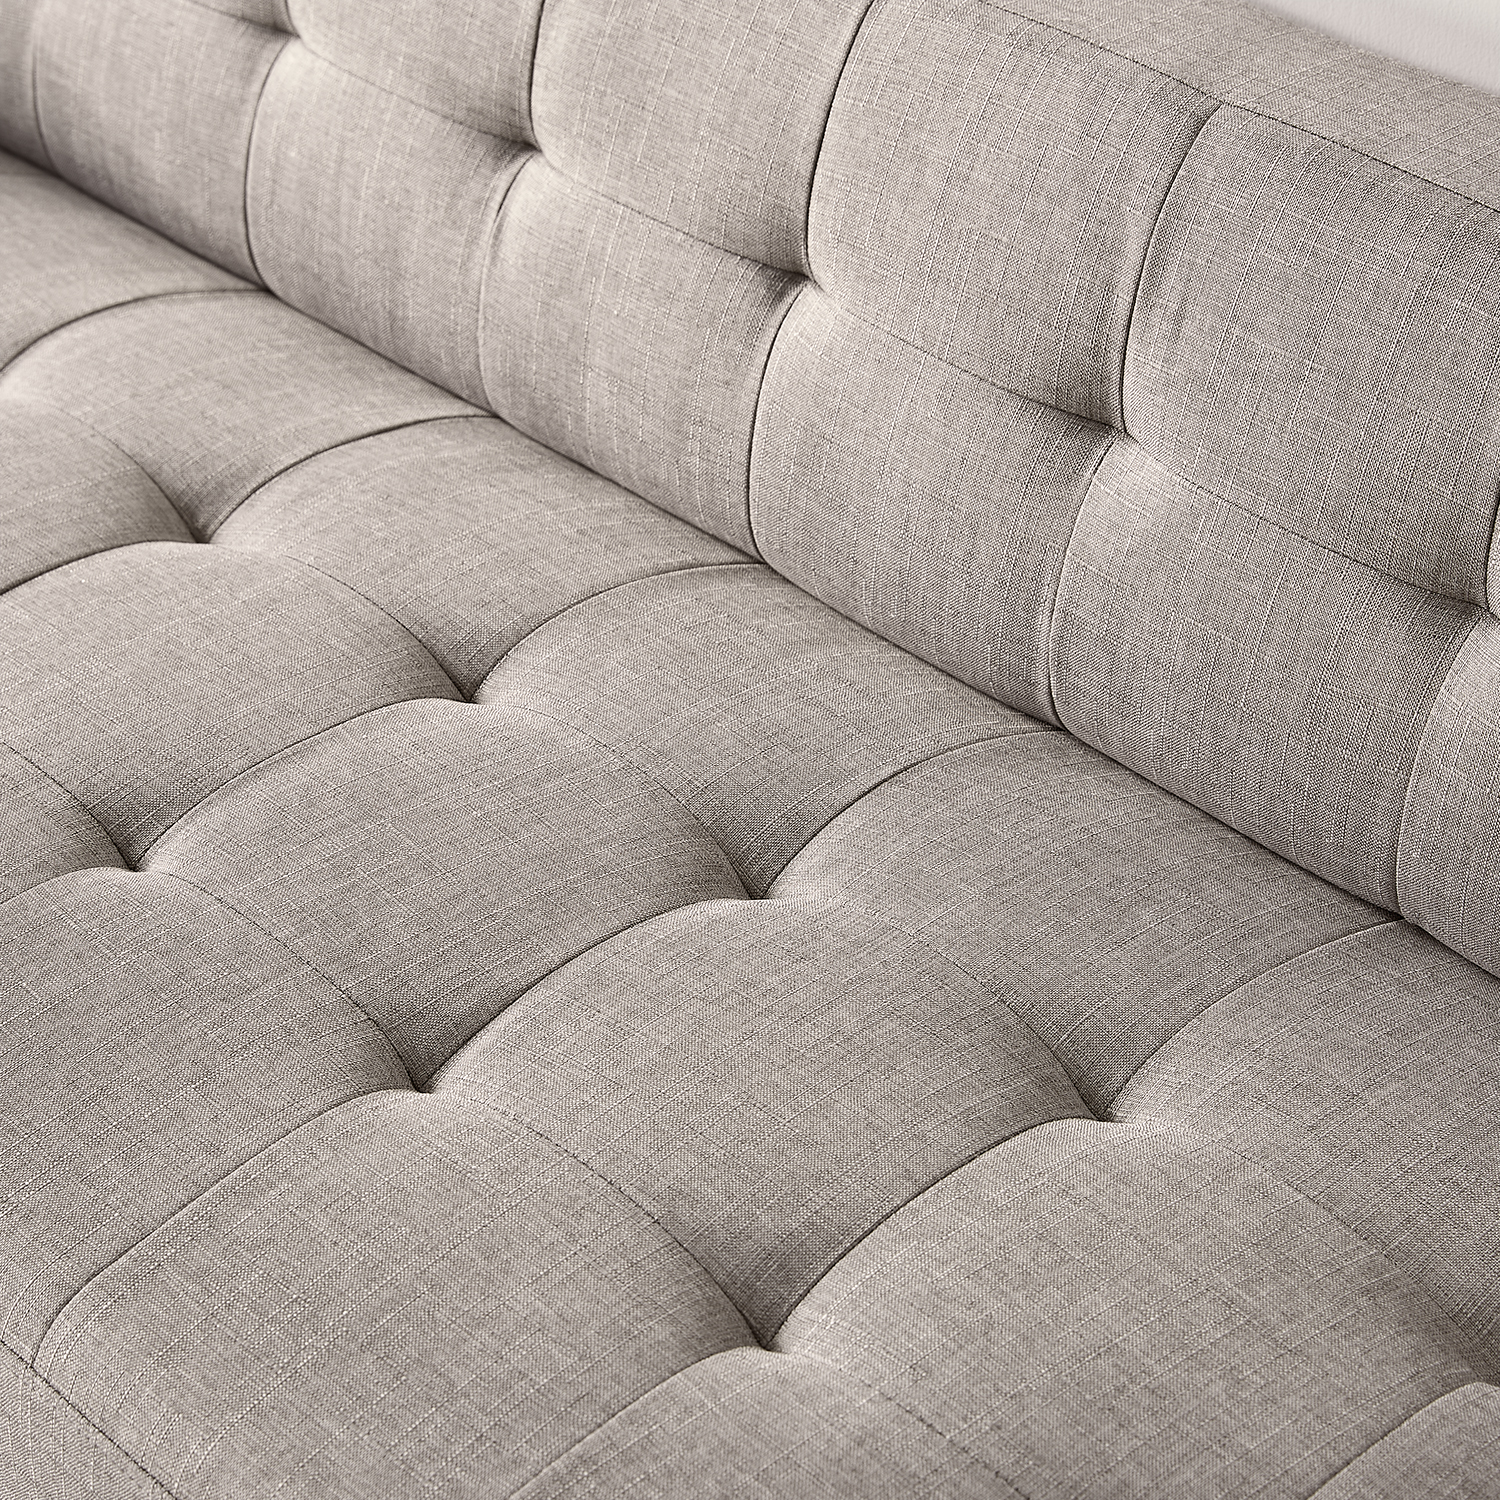 Woven Paths Pascal 73" Fabric Sofa Couch, Oatmeal - image 5 of 7